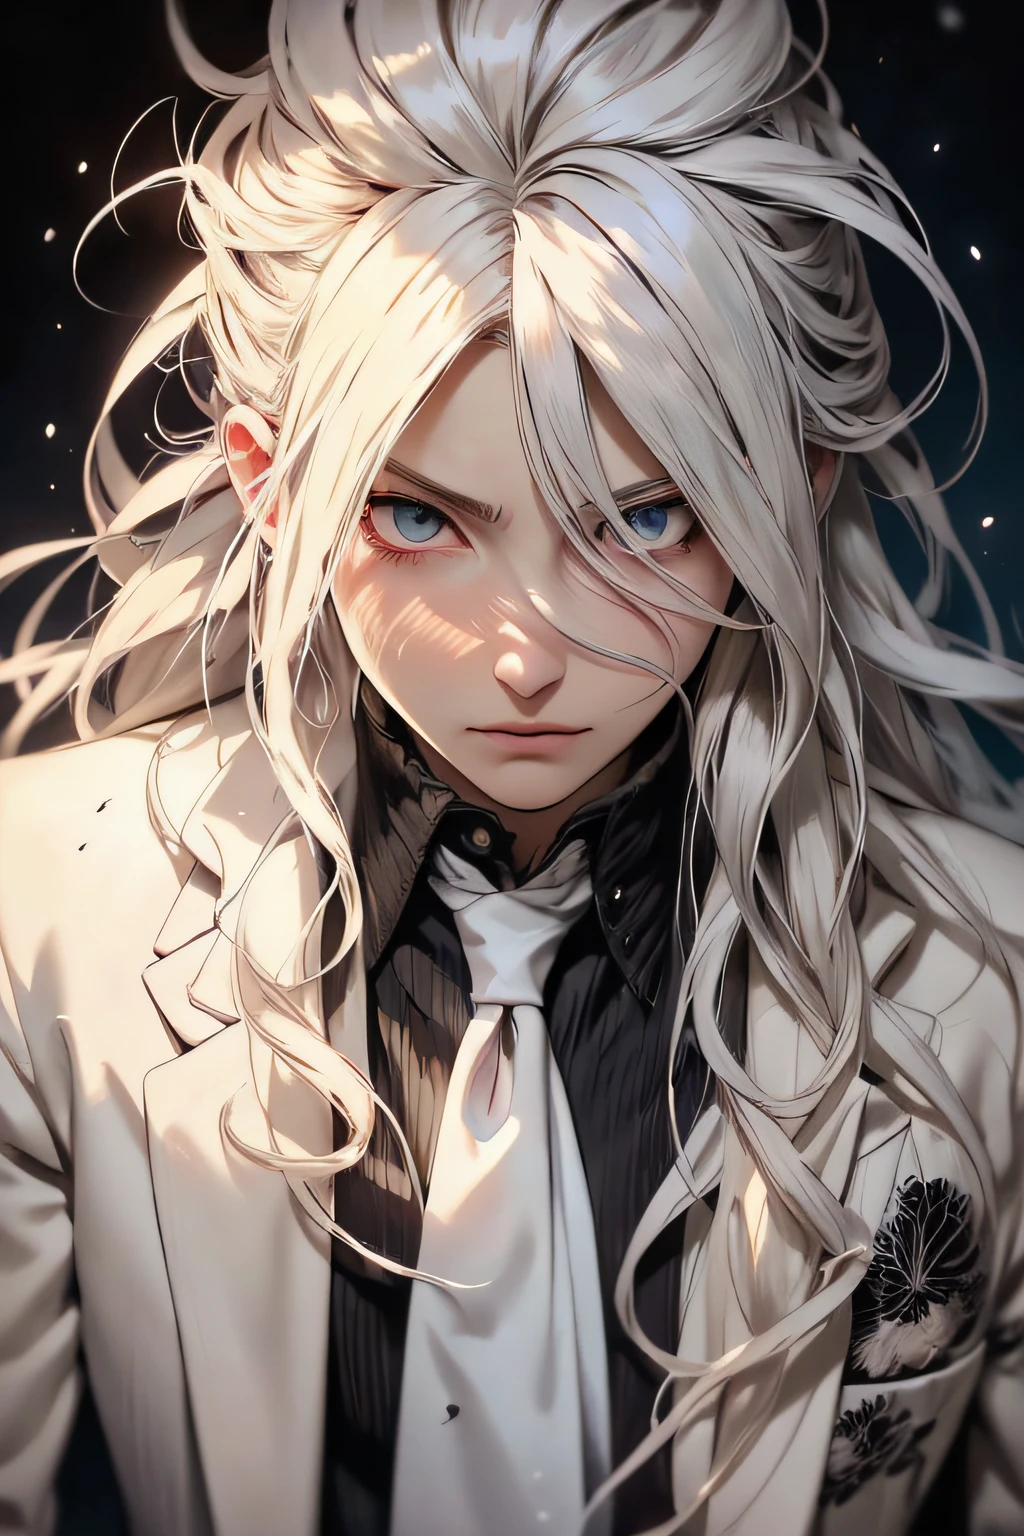 anime character with pure white hair and blue eyes staring at something, Gojo Satorou portrait, Gojo Satorou white hair, kaneki ken, ken kaneki, ufotable art style, Gojo satorou, male anime character, tokyo ghoul, white haired, nagito komaeda from danganronpa, white-haired